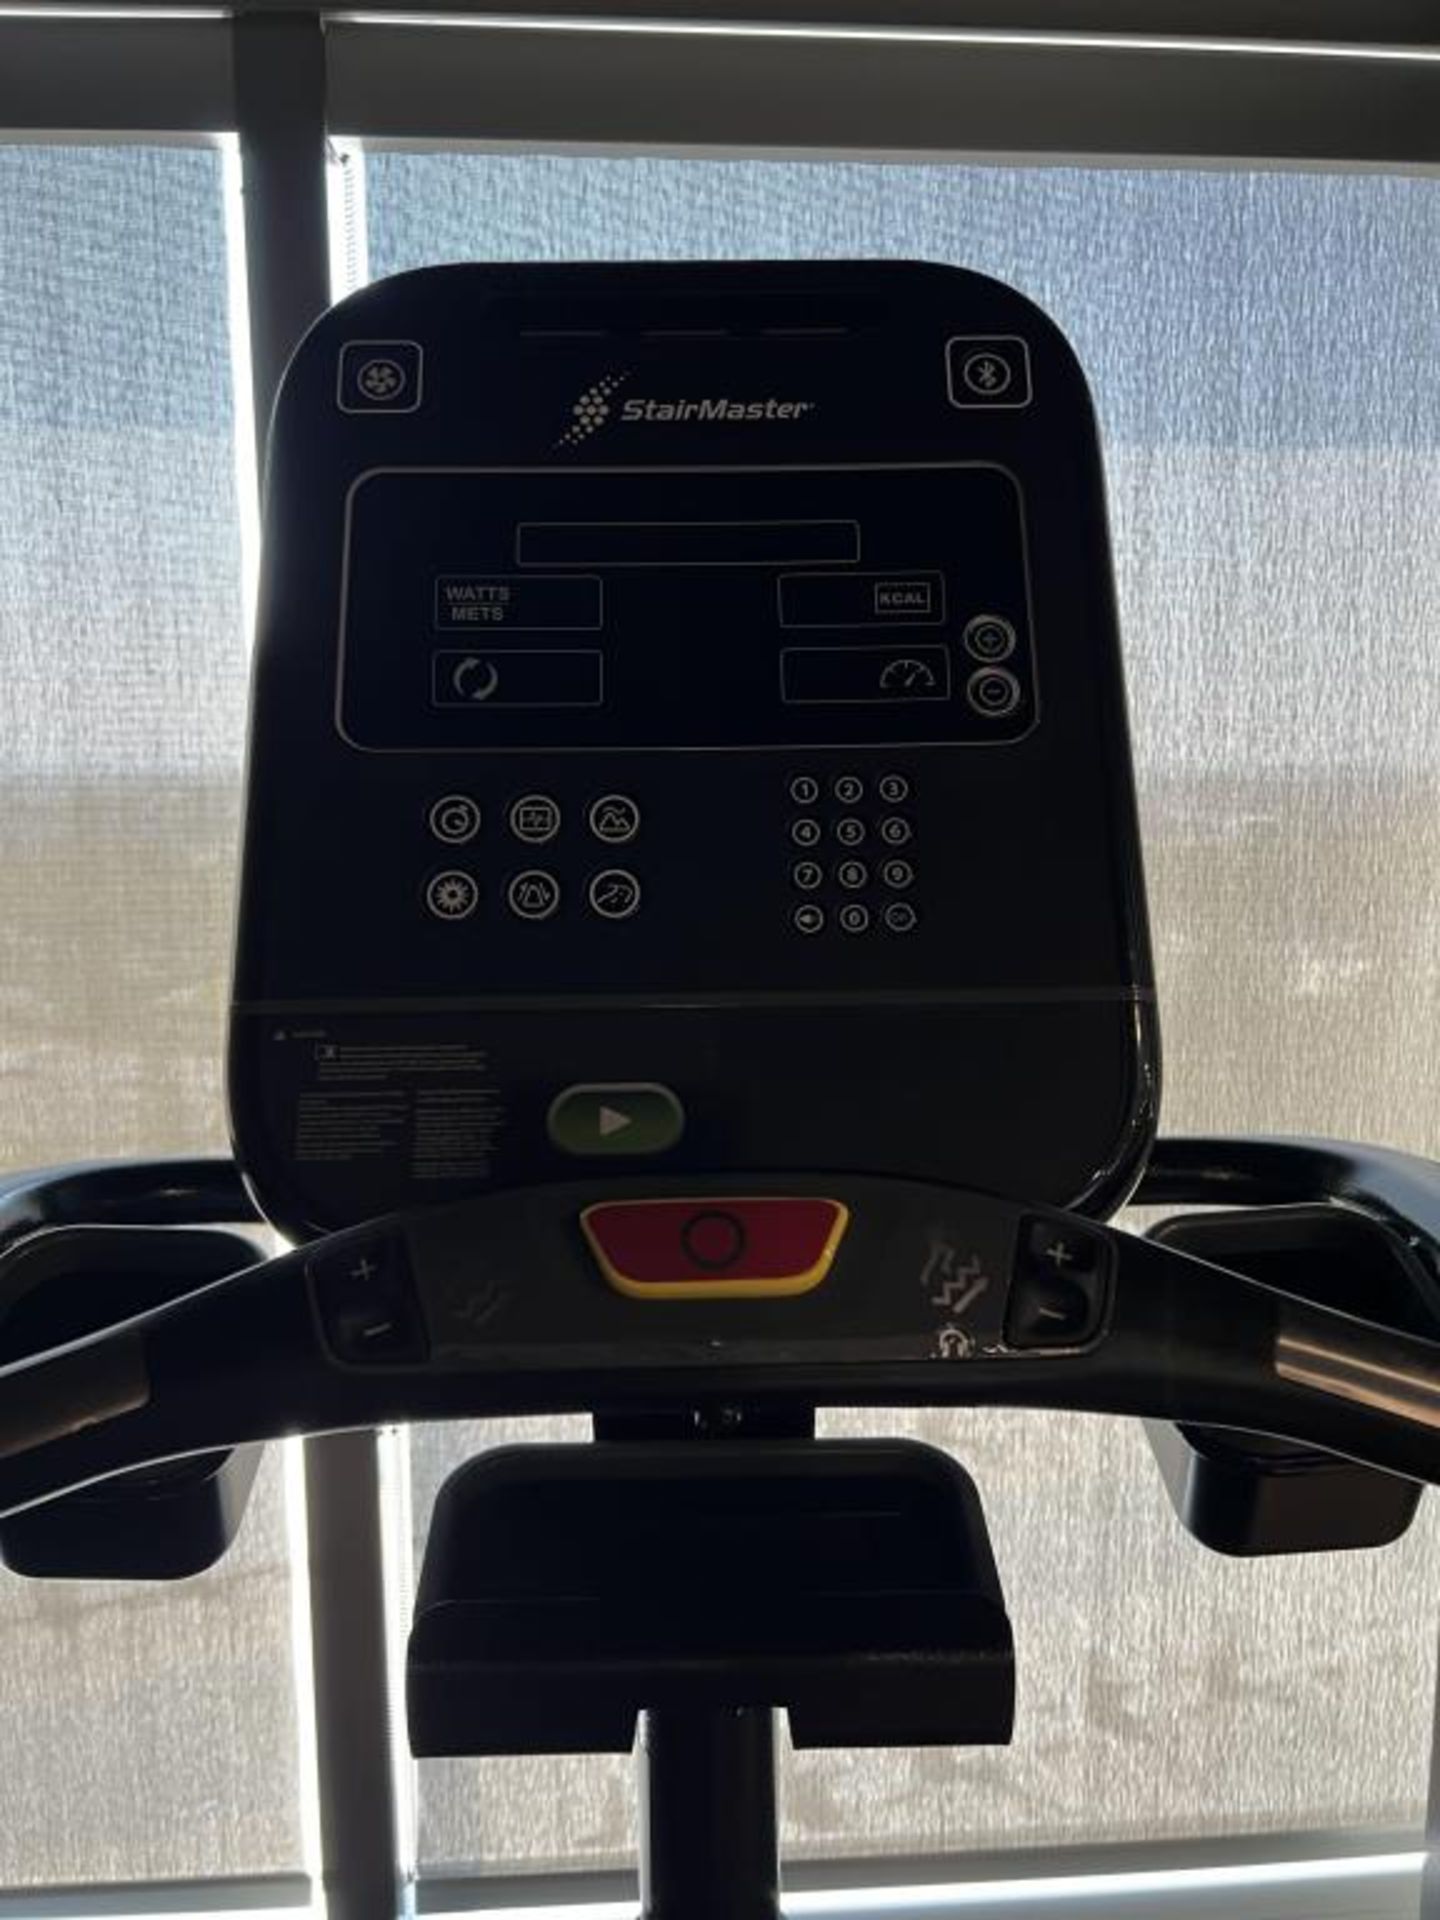 Stair Master Stepping Machine - Image 3 of 4